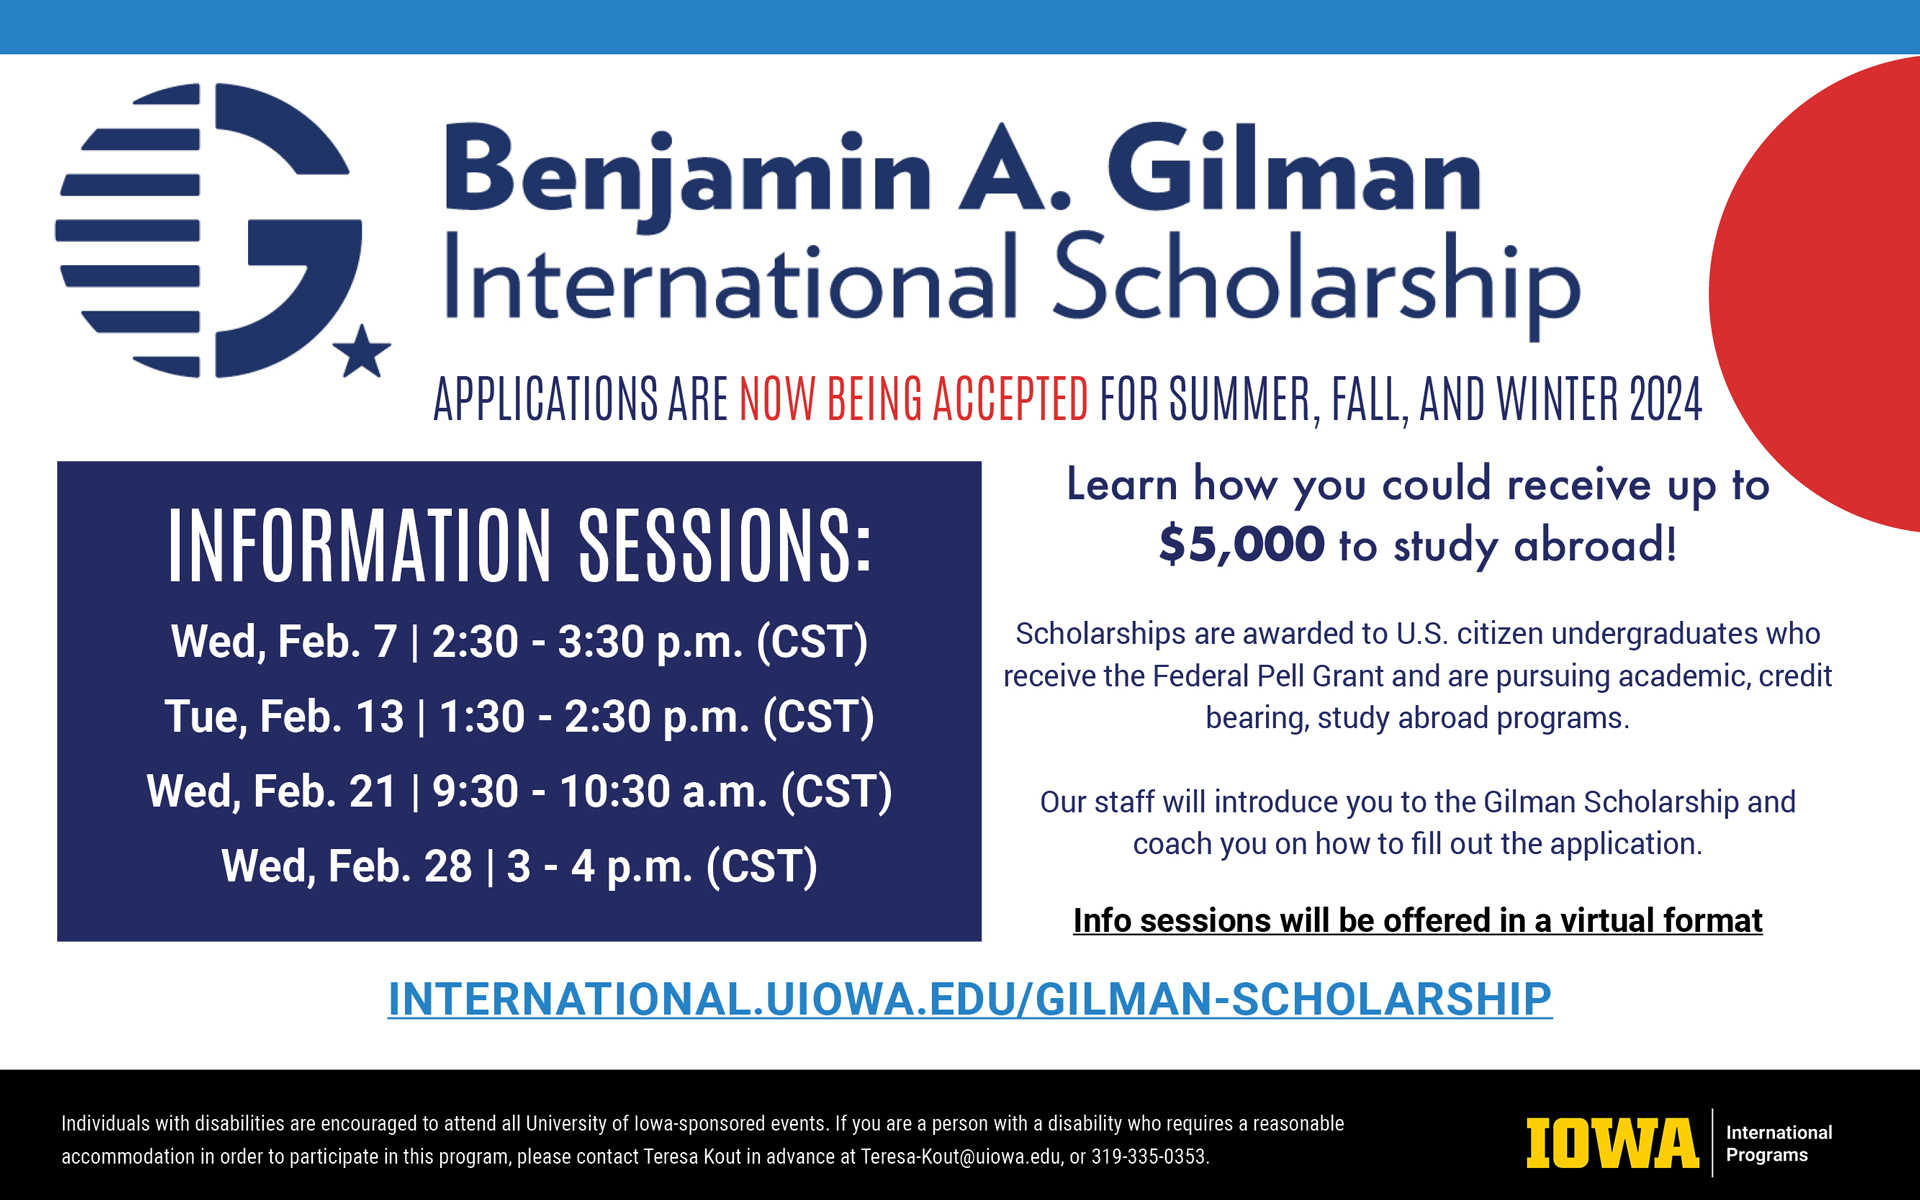 Benjamin A. Gilman International Scholarship: Receive up to $5,000 to study abroad!